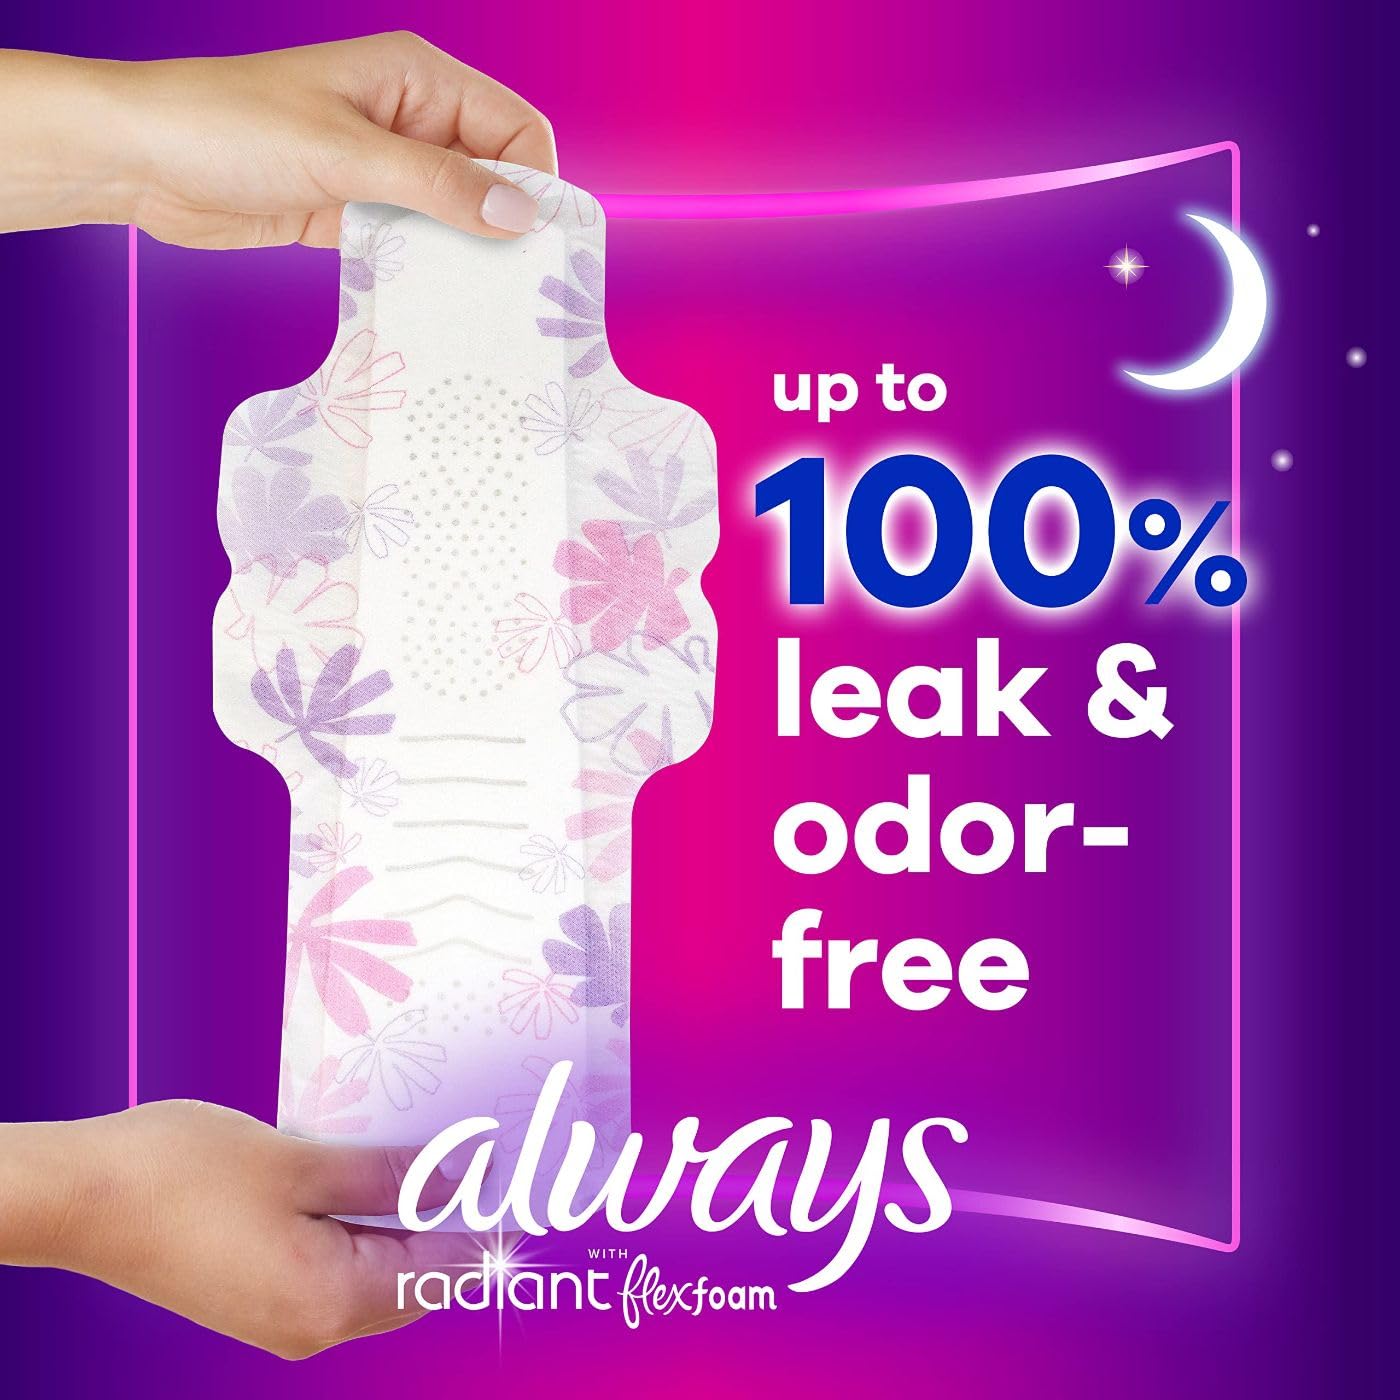 Always Radiant Overnight Feminine Pads for Women, Size 4 for Nighttime, with Wings, Scented, 60 CT